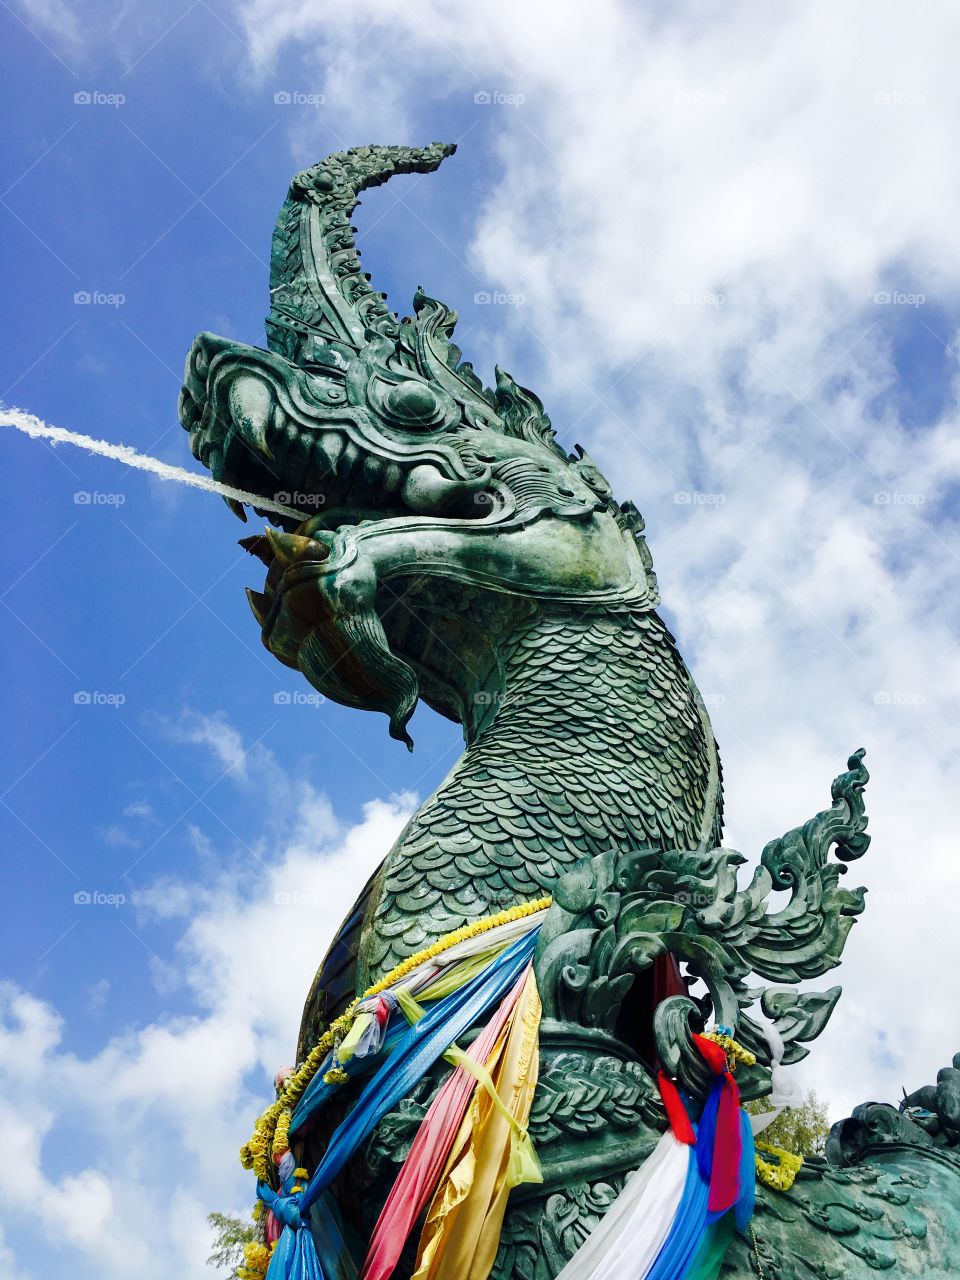 The great serpent or naga statue in thailand